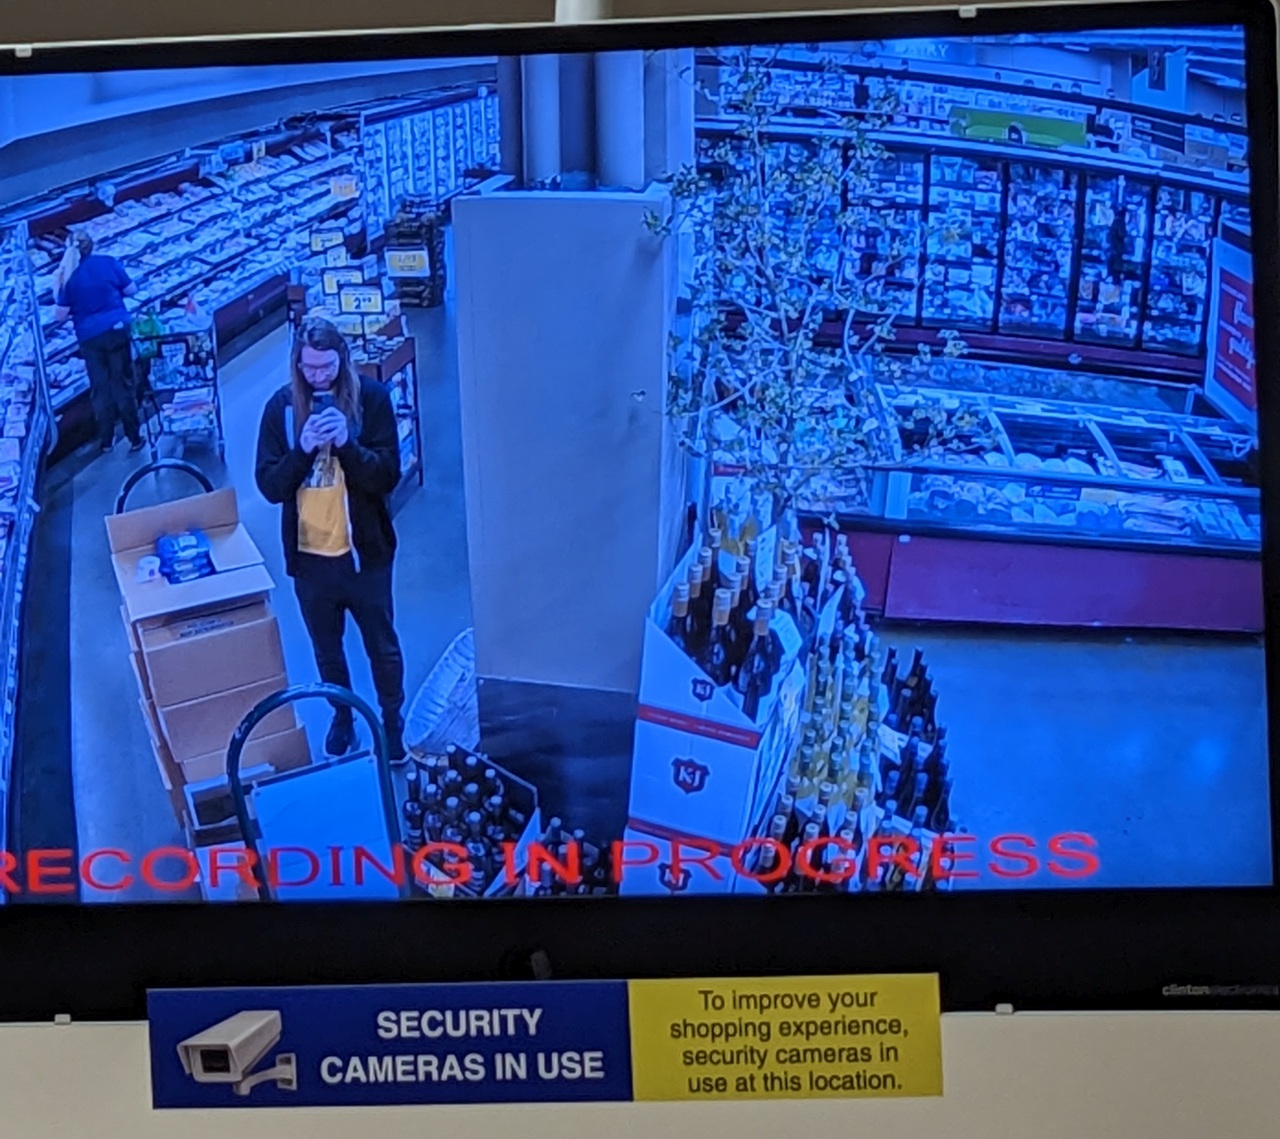 Self-portrait at the QFC. As you can see, my shopping experience was enhanced greatly by the security cameras.